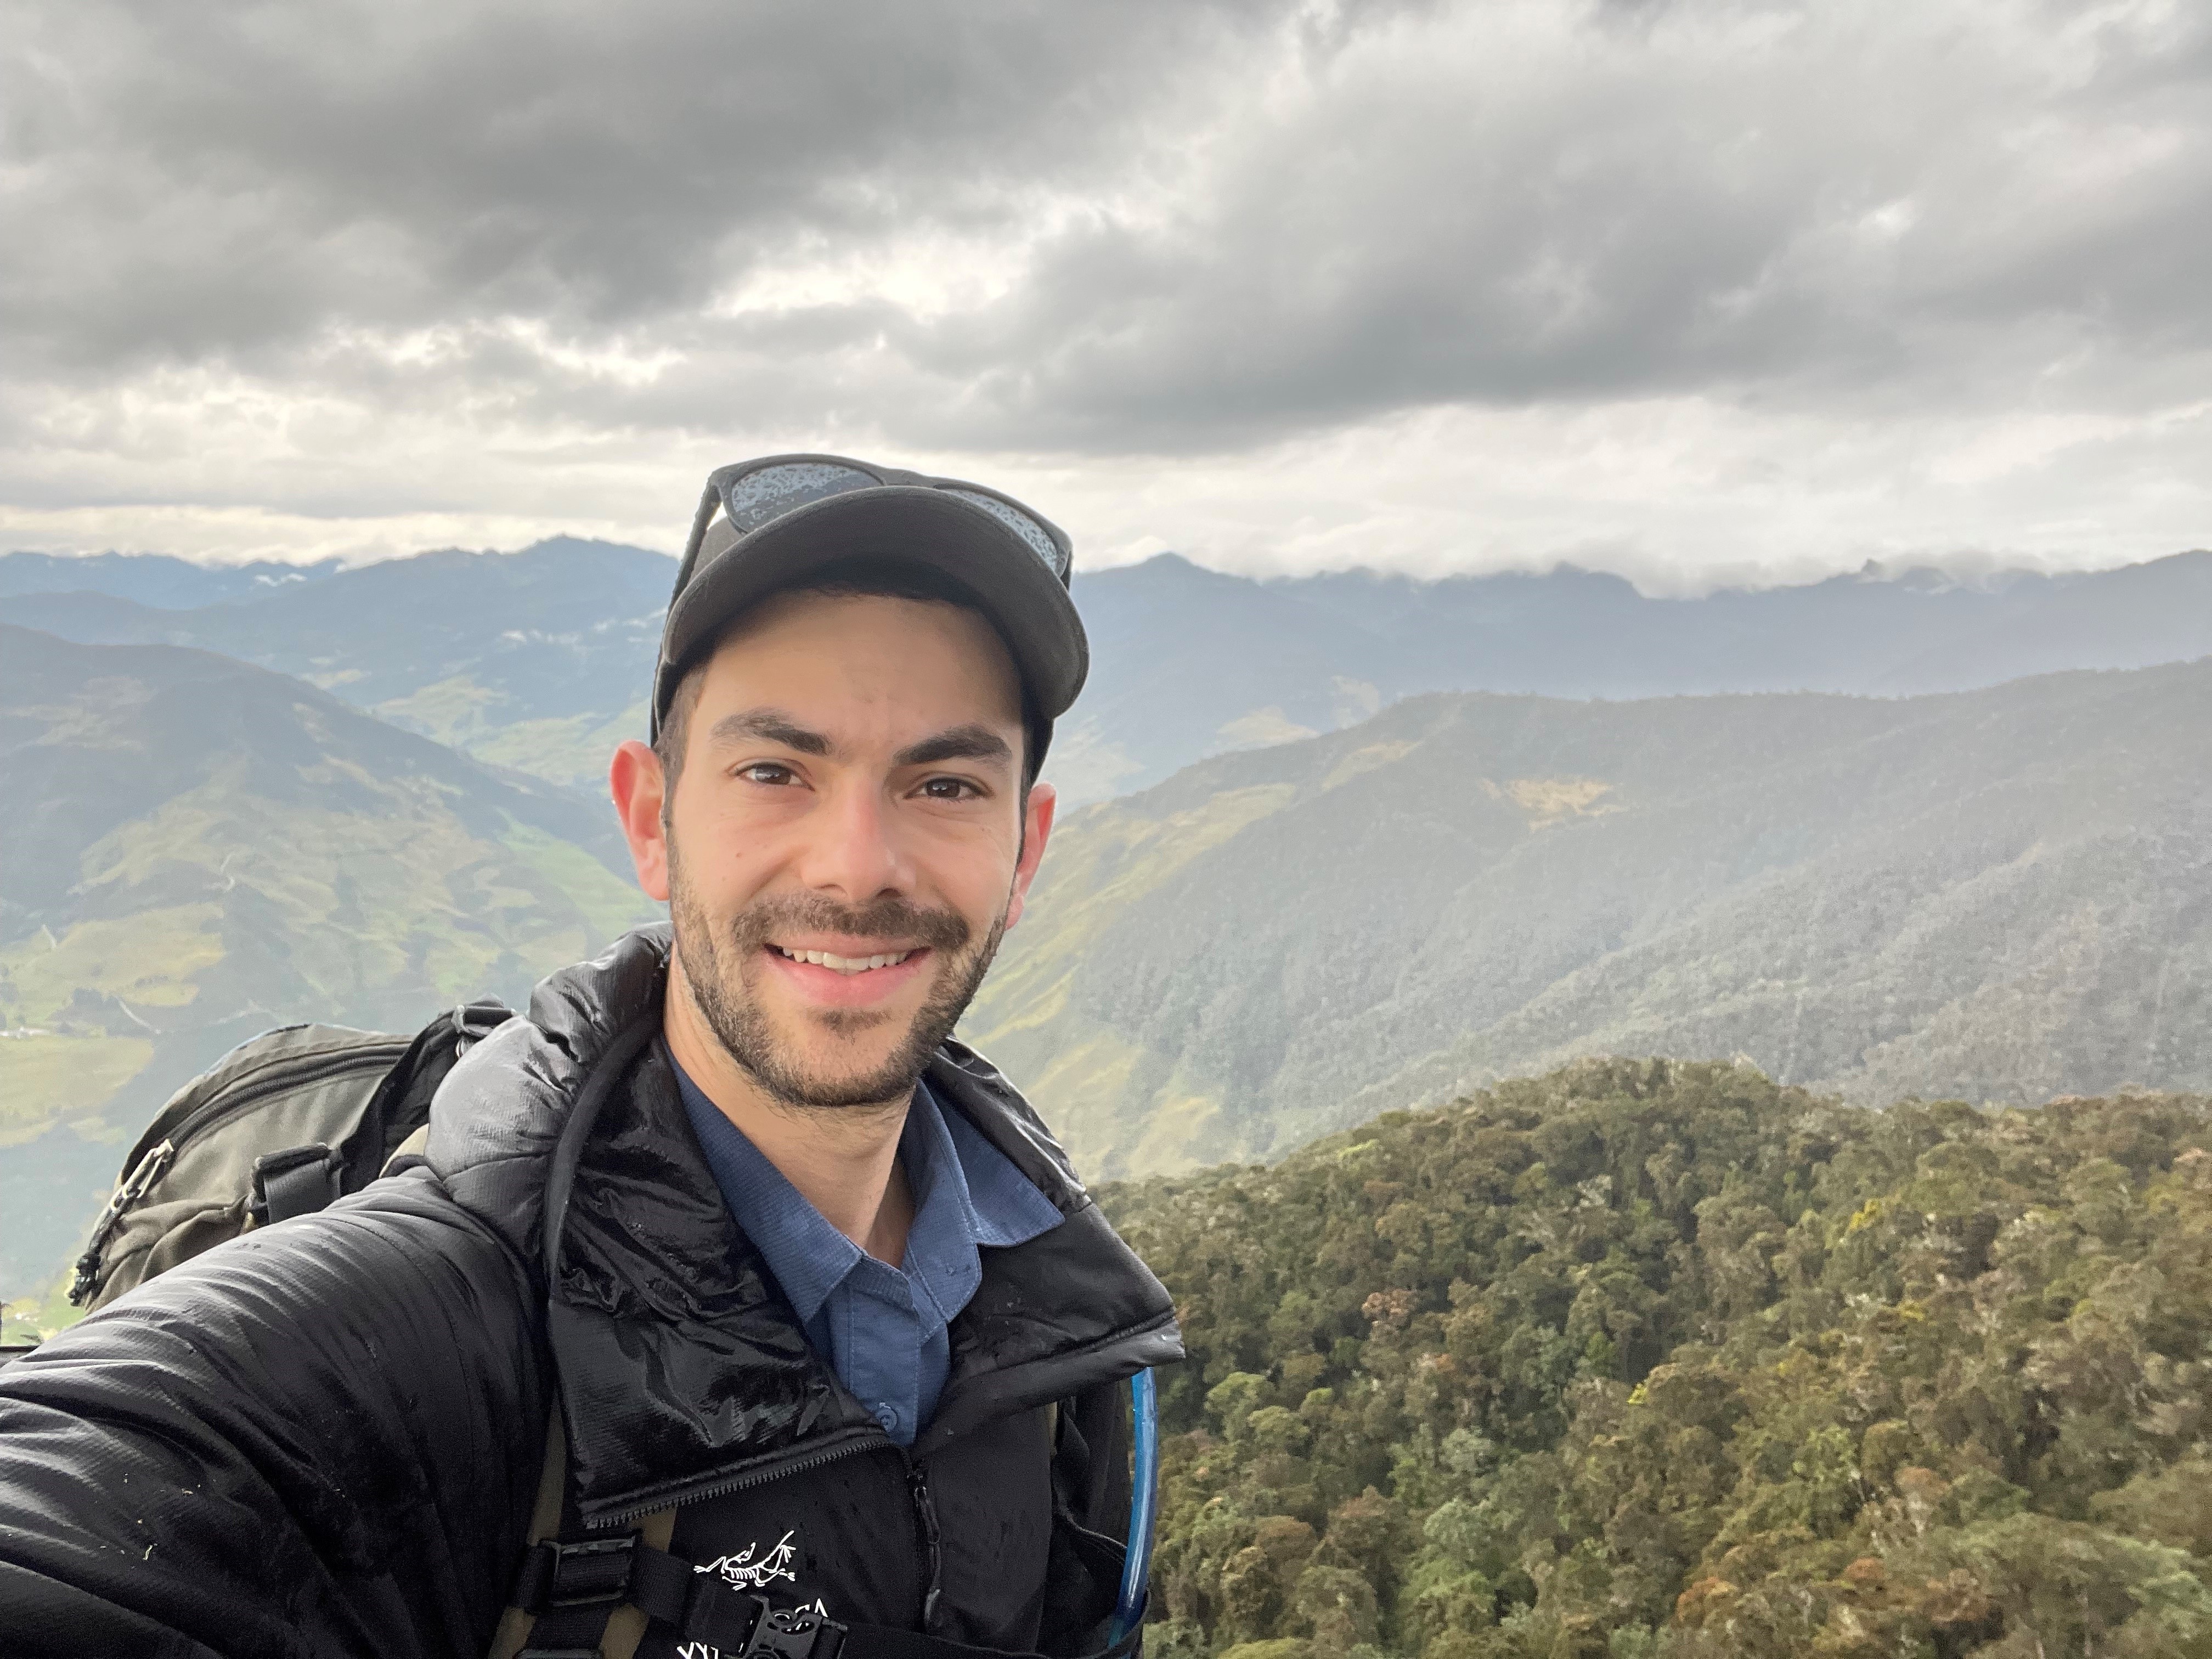 Ecuador alum’s research focused on how science informs decision-making